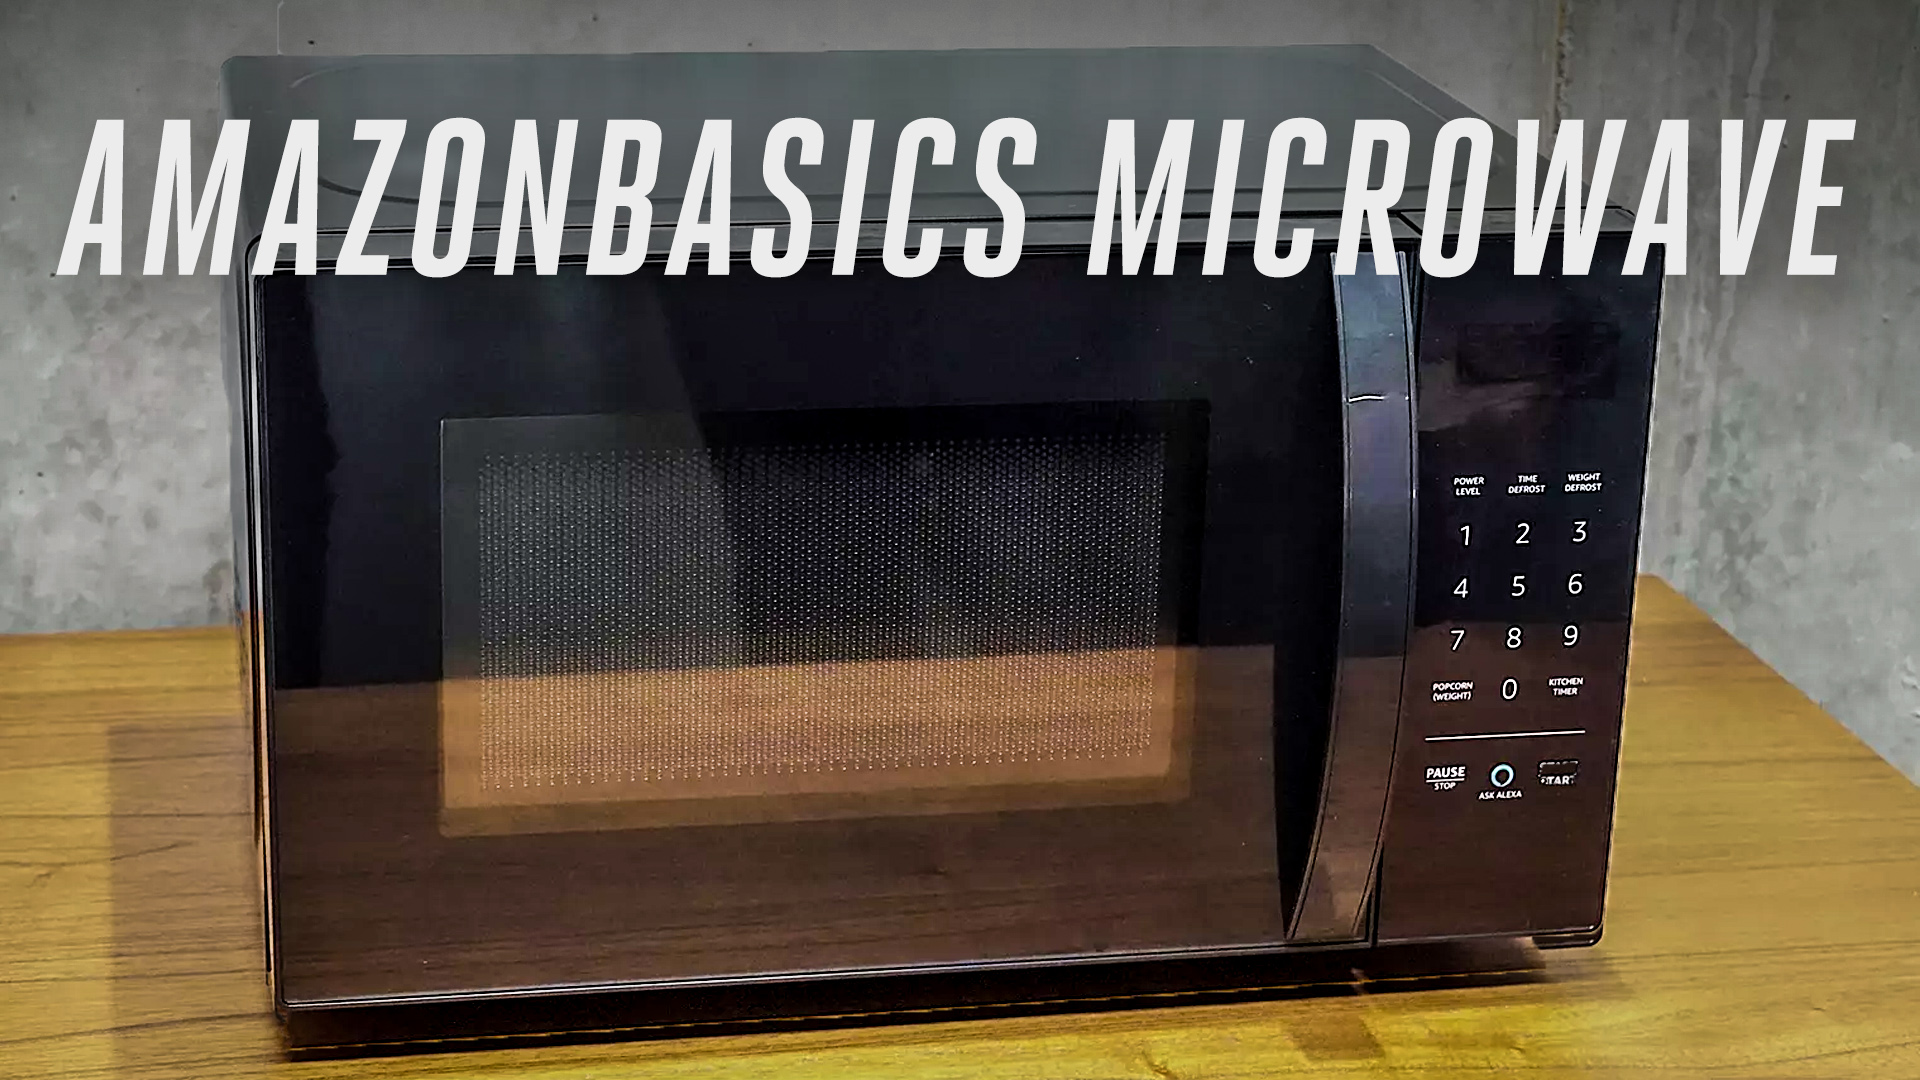 Basics Microwave review: Alexa makes you popcorn, orders more in this  compact, affordable microwave - CNET